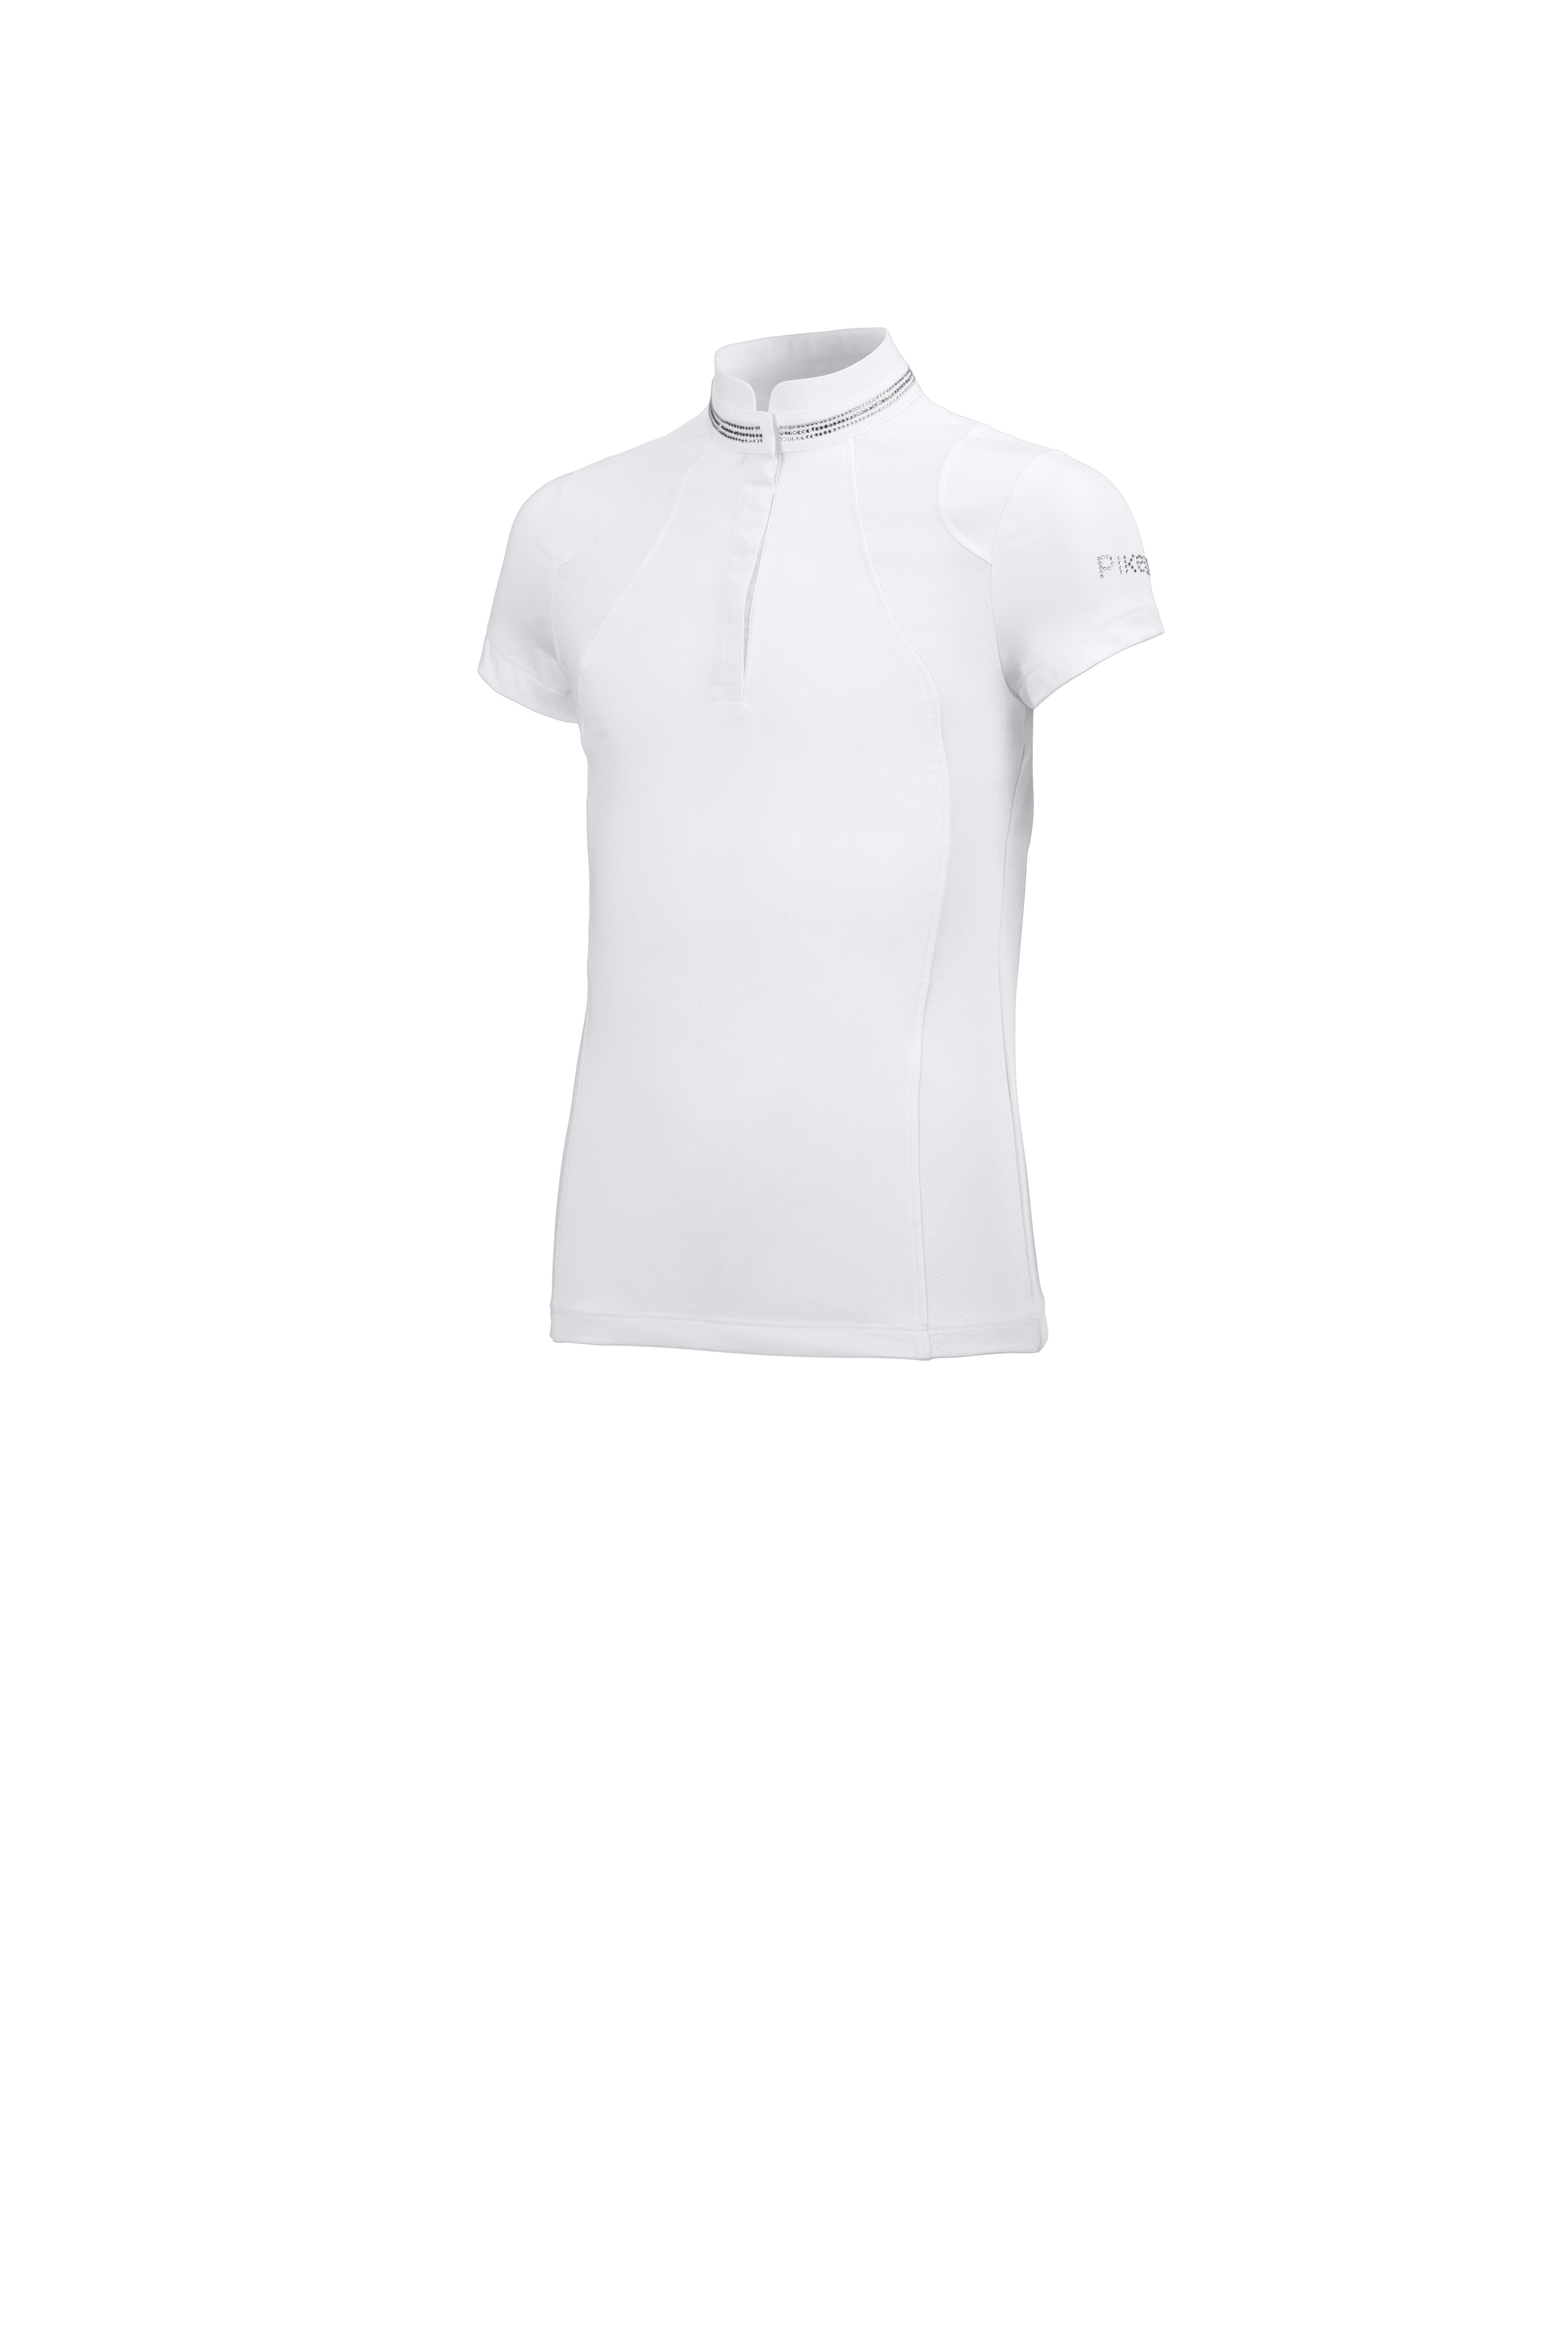 Pikeur Ladies Competition Shirt 408 short sleeve In Blue 